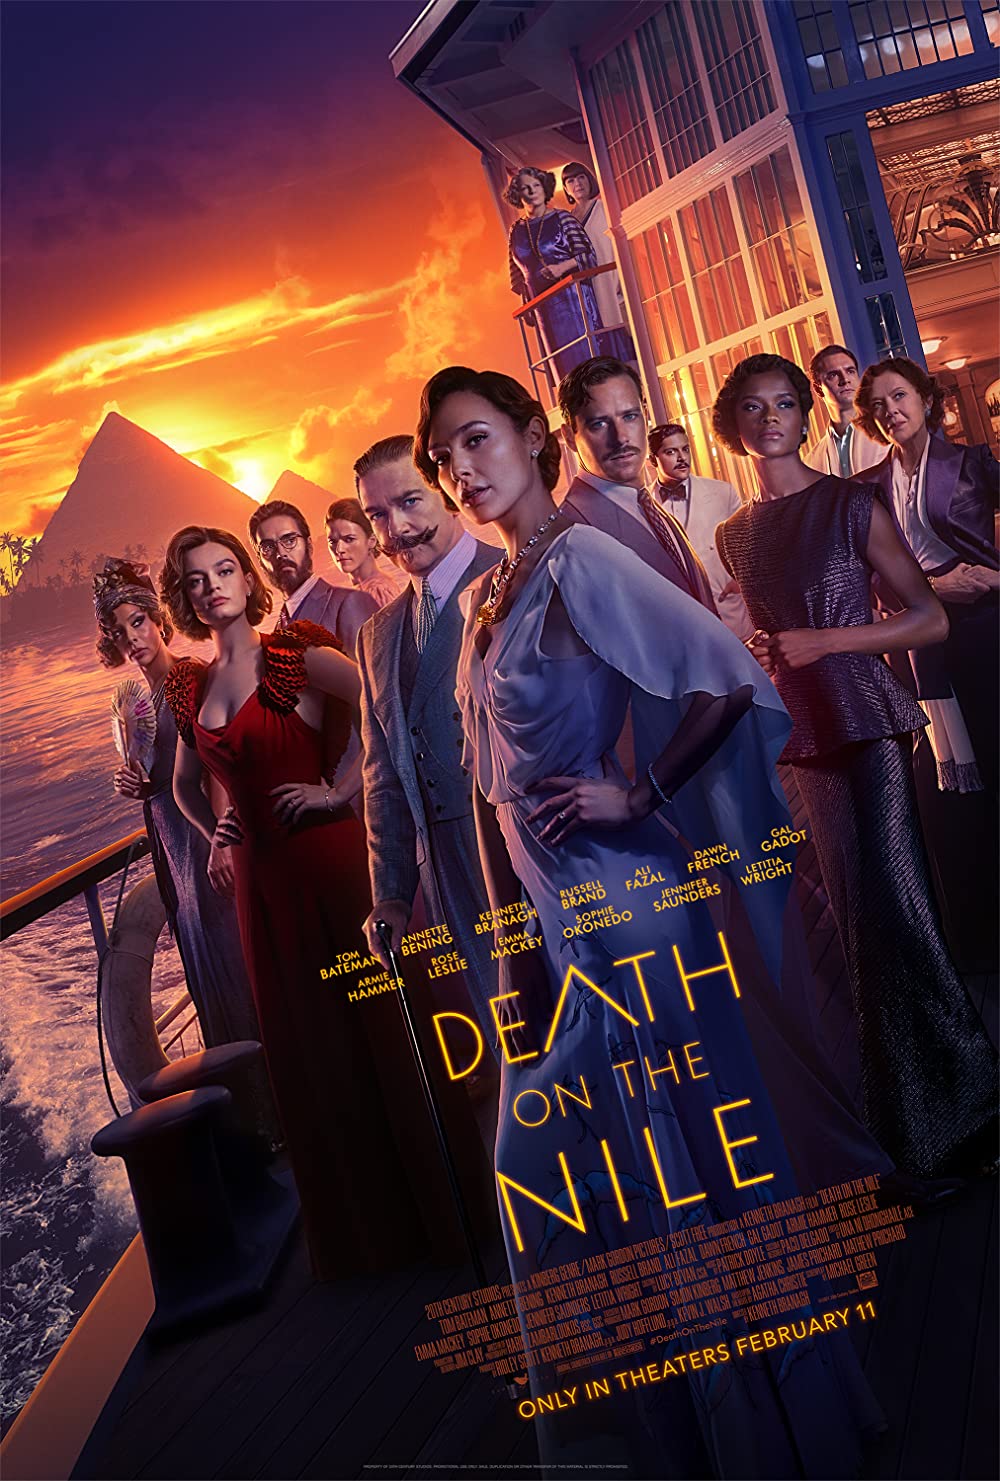 Cover Art for "Death on the Nile"